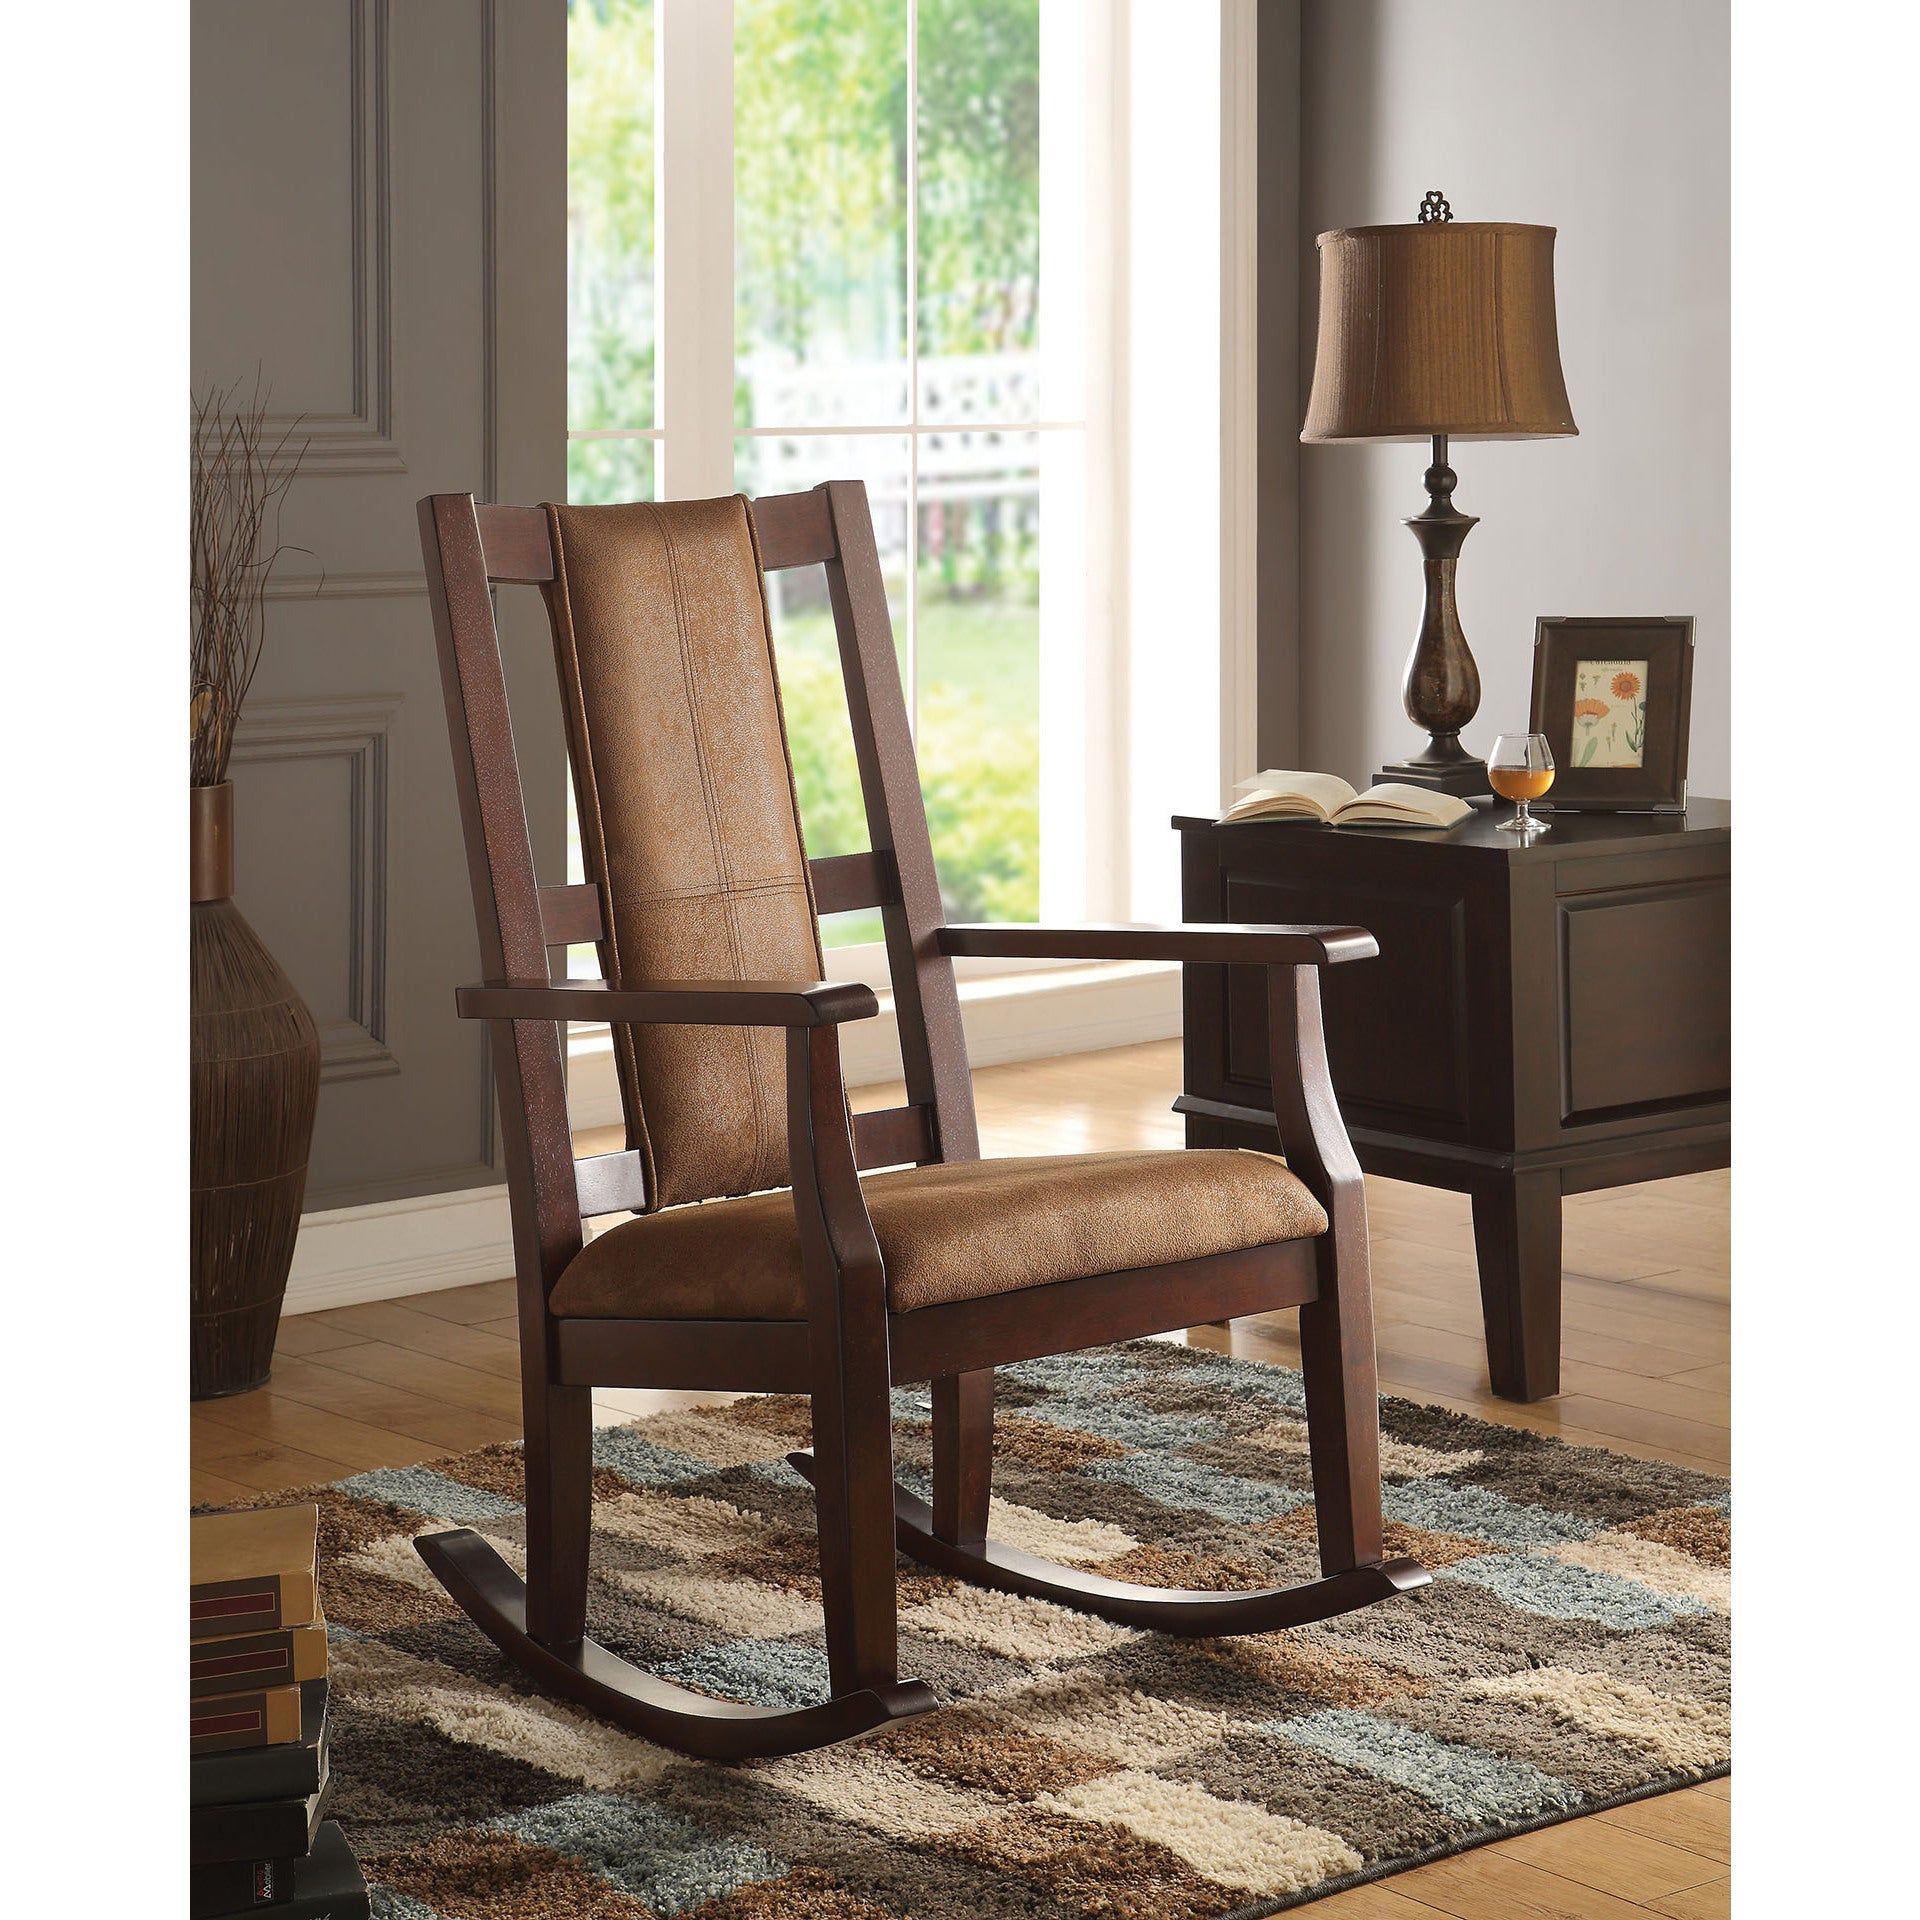 High Back, Rocking Chairs Living Room Chairs | Shop Online Intended For Westridge Nail Head Trim Chestnut Rocking Chairs (View 5 of 20)